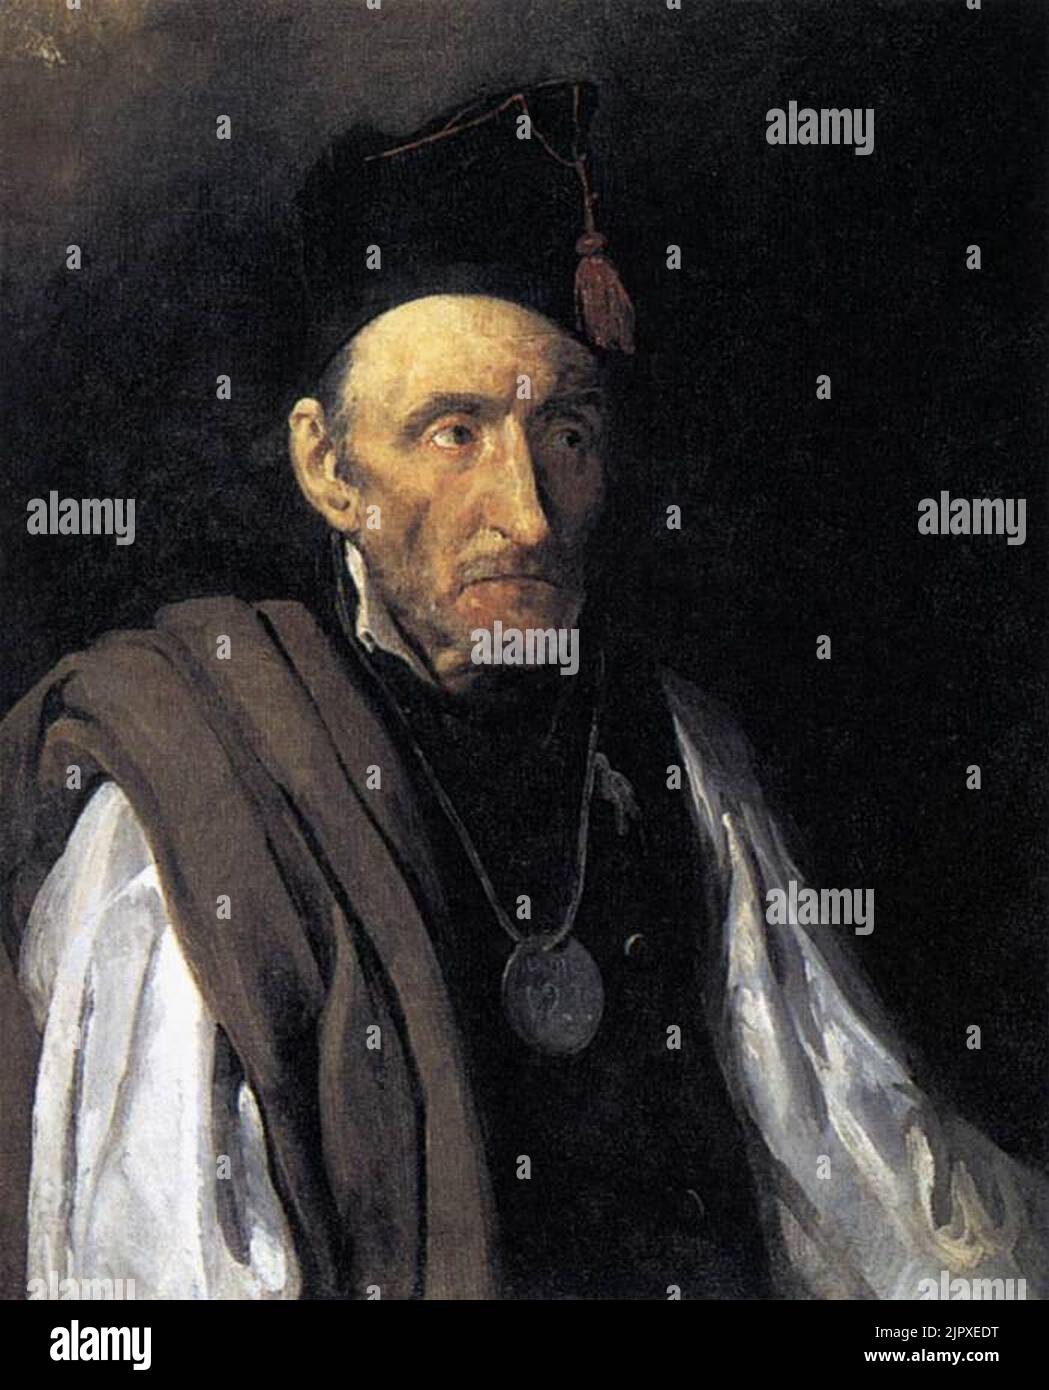 Théodore Géricault - Man with Delusions of Military Command Stock Photo